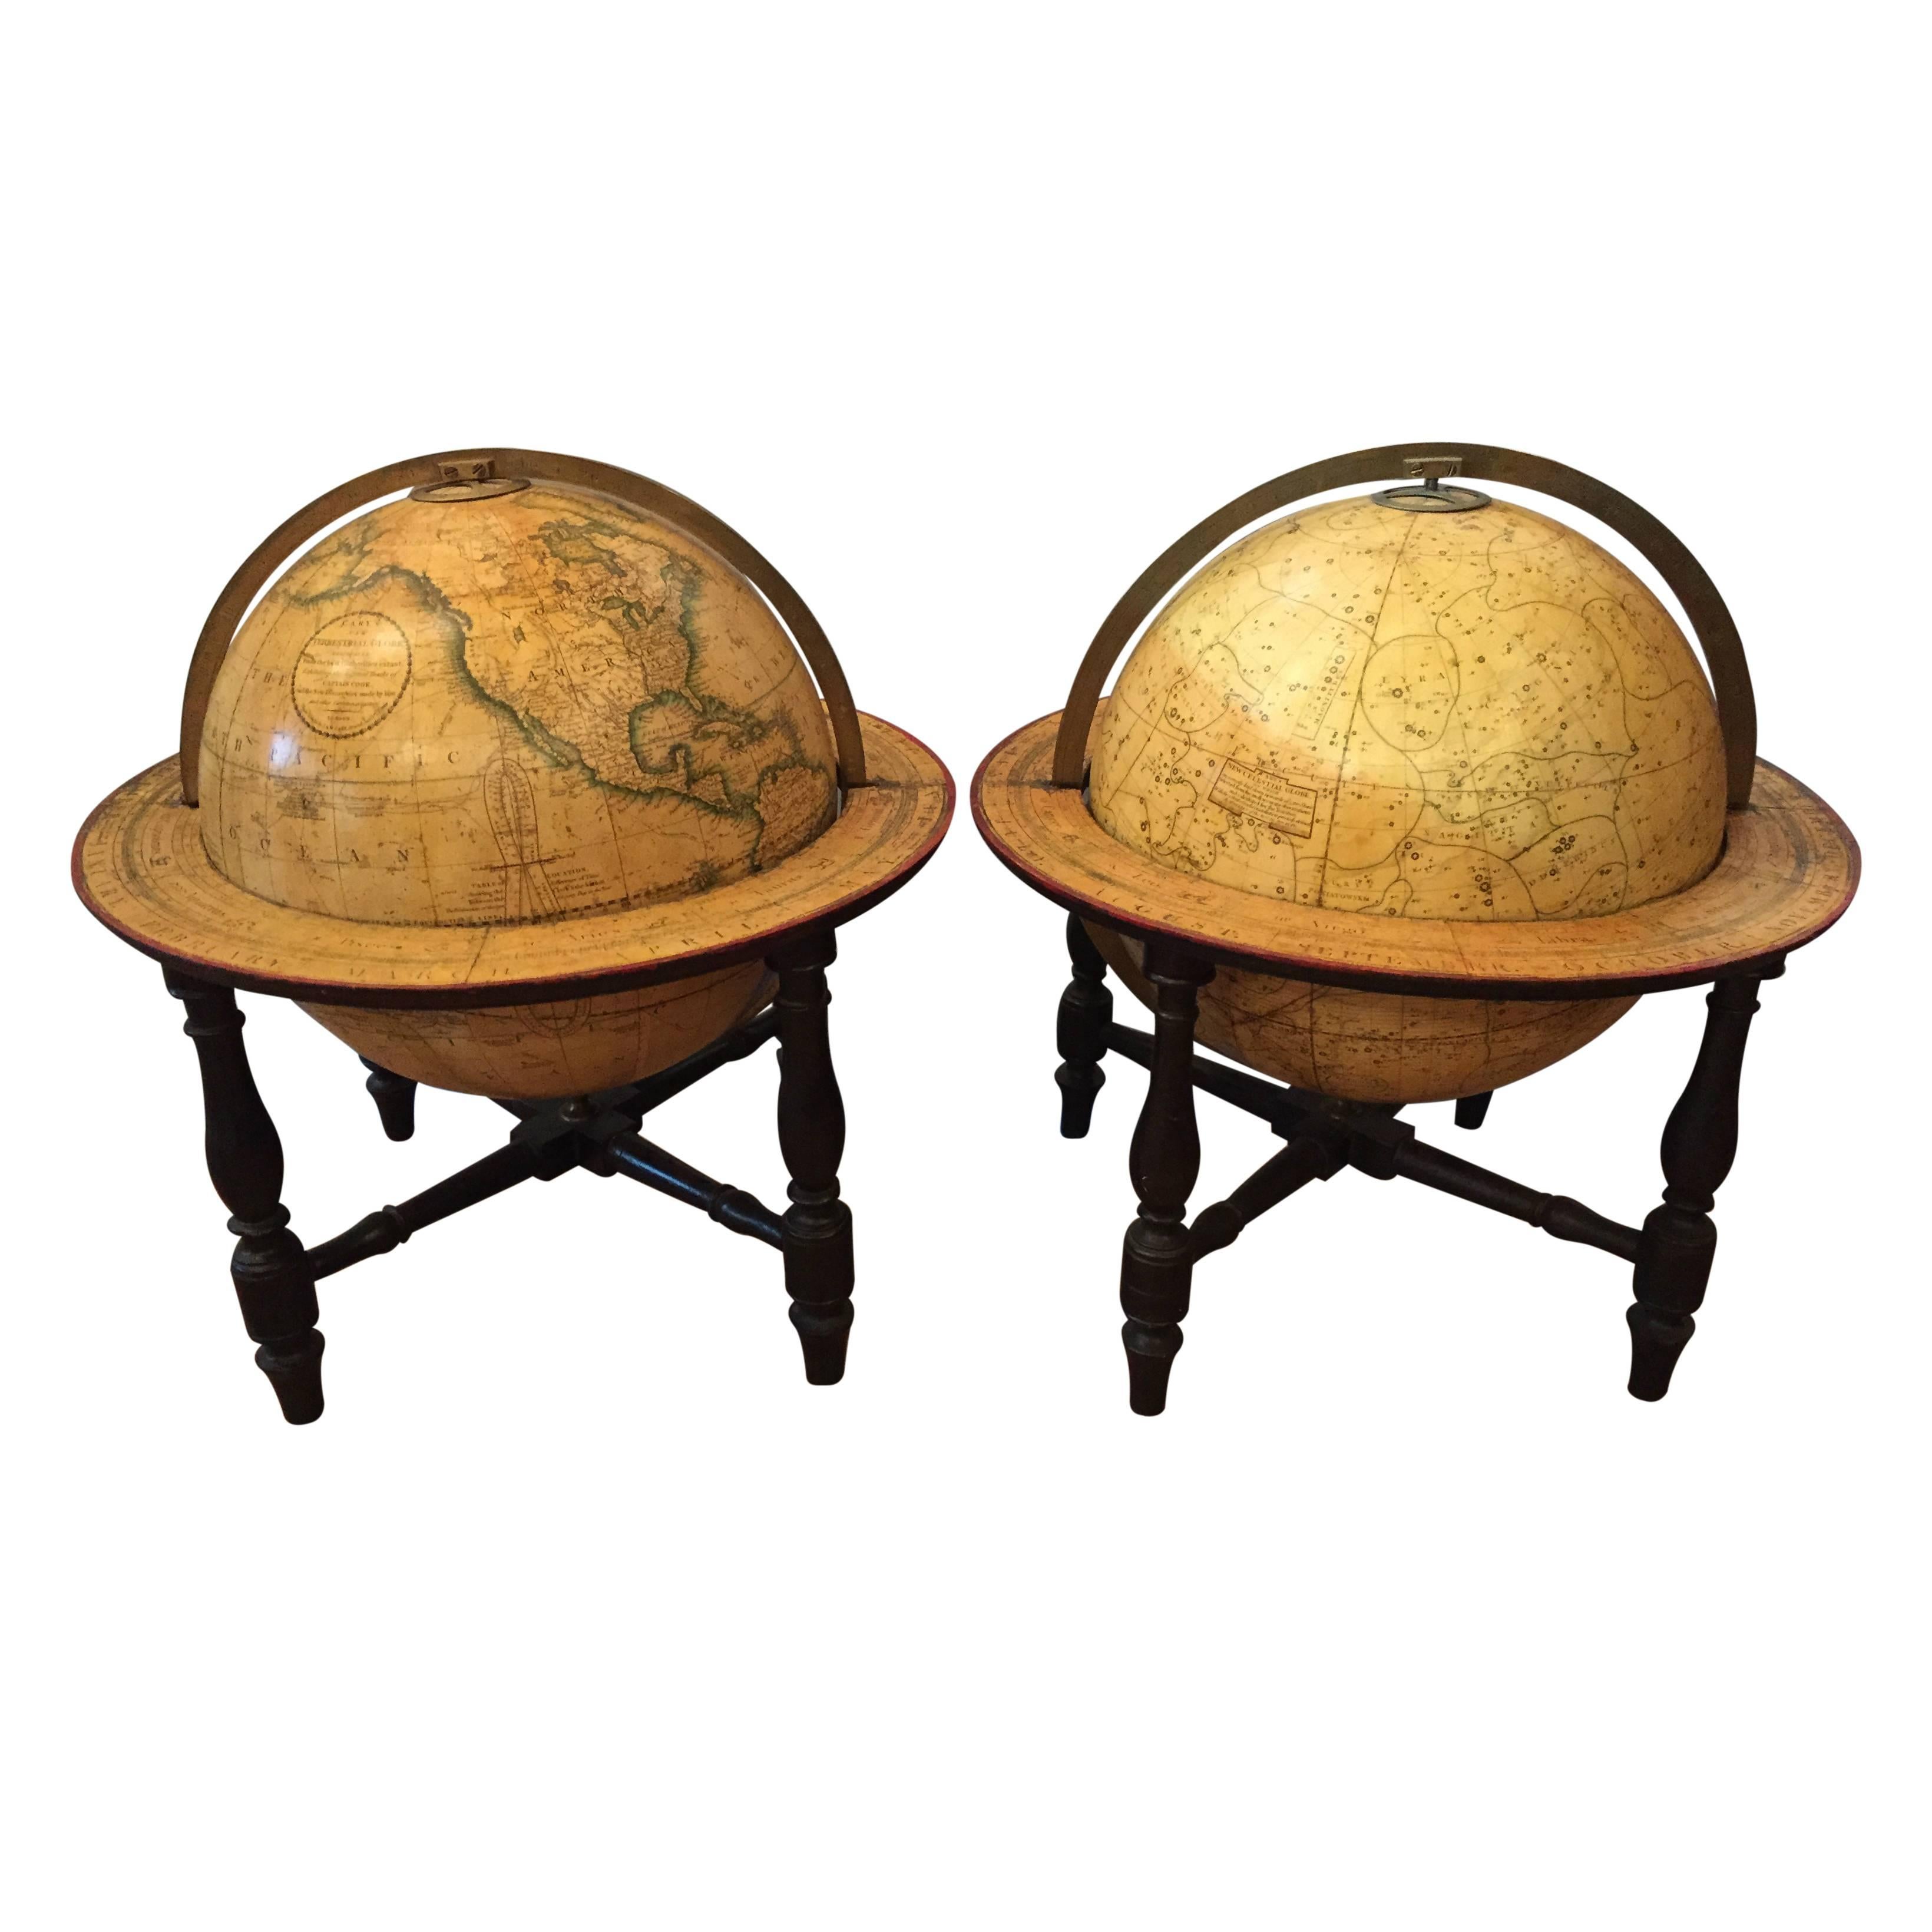 Pair of 19th Century Cary's Globes